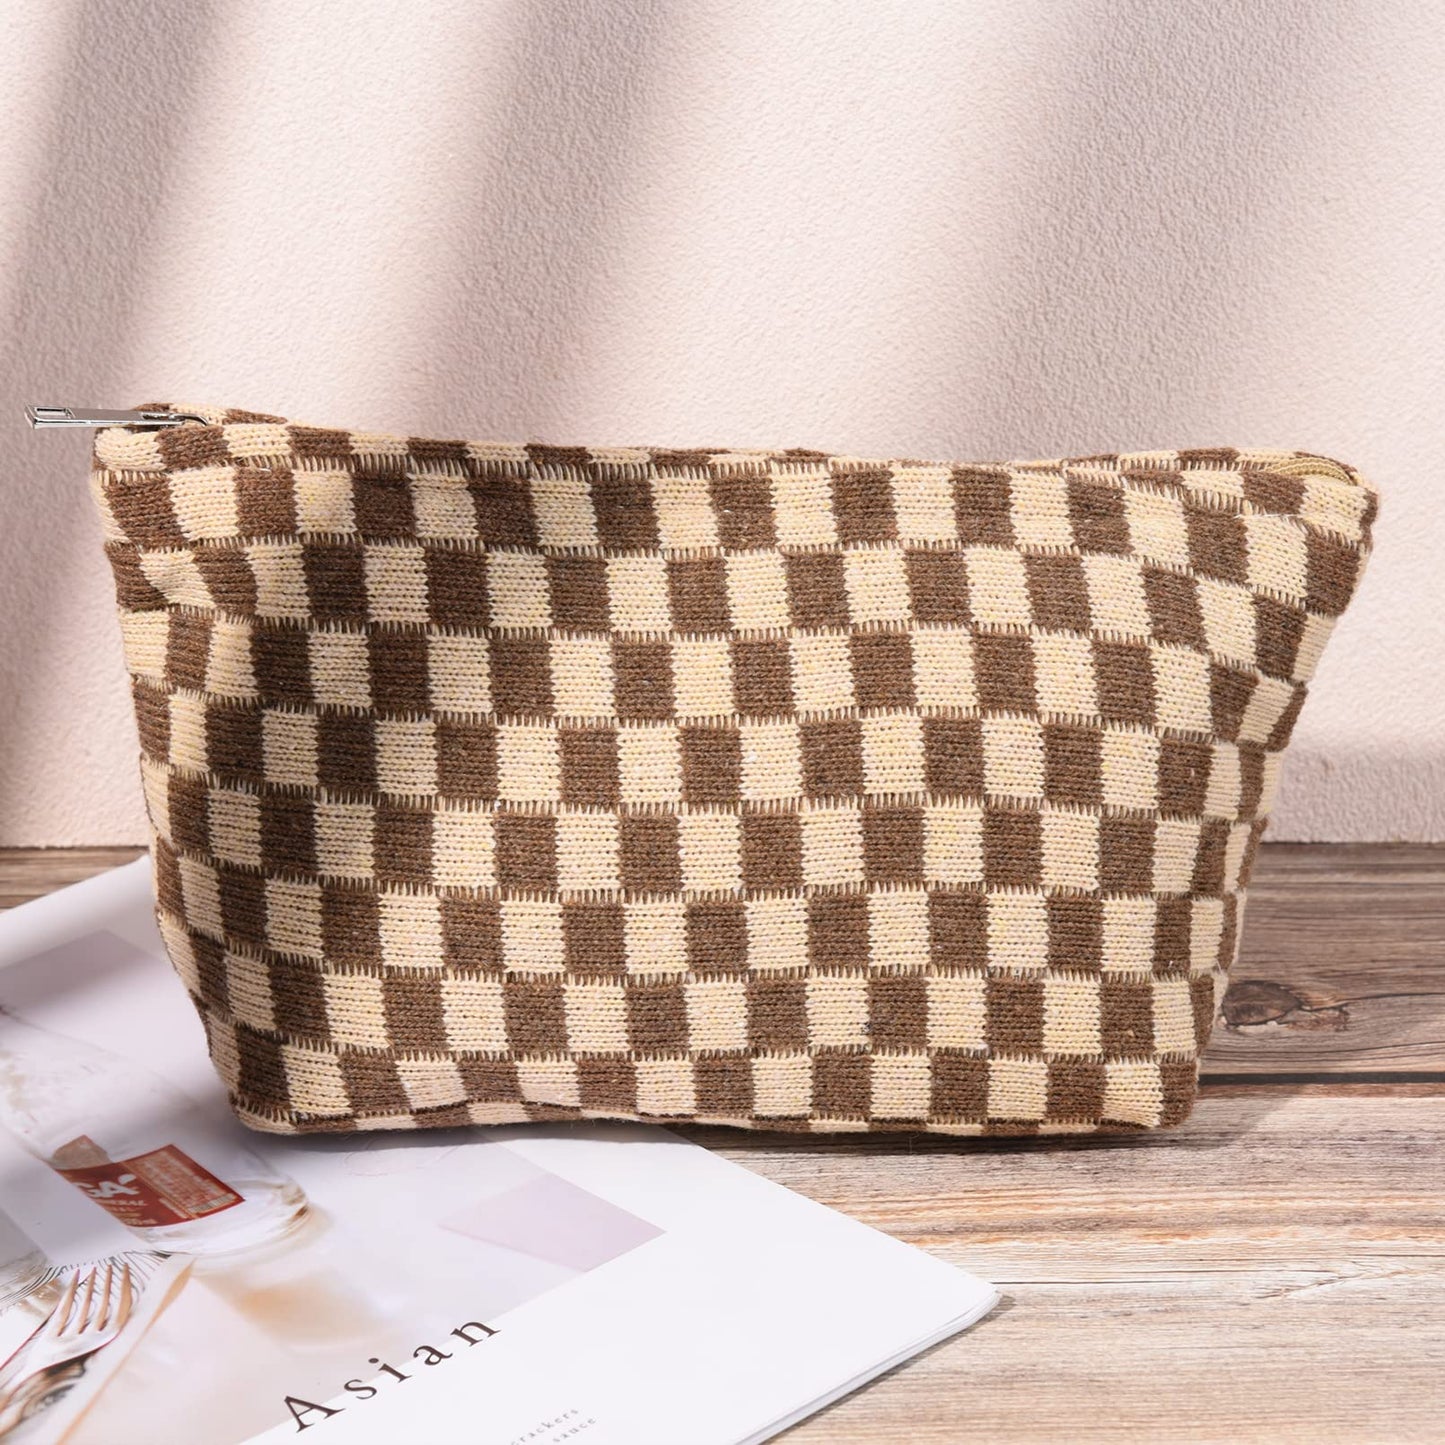 SOIDRAM 2 Pieces Makeup Bag Large Checkered Cosmetic Bag Brown Capacity Canvas Travel Toiletry Bag Organizer Cute Makeup Brushes Aesthetic Accessories Storage Bag for Women